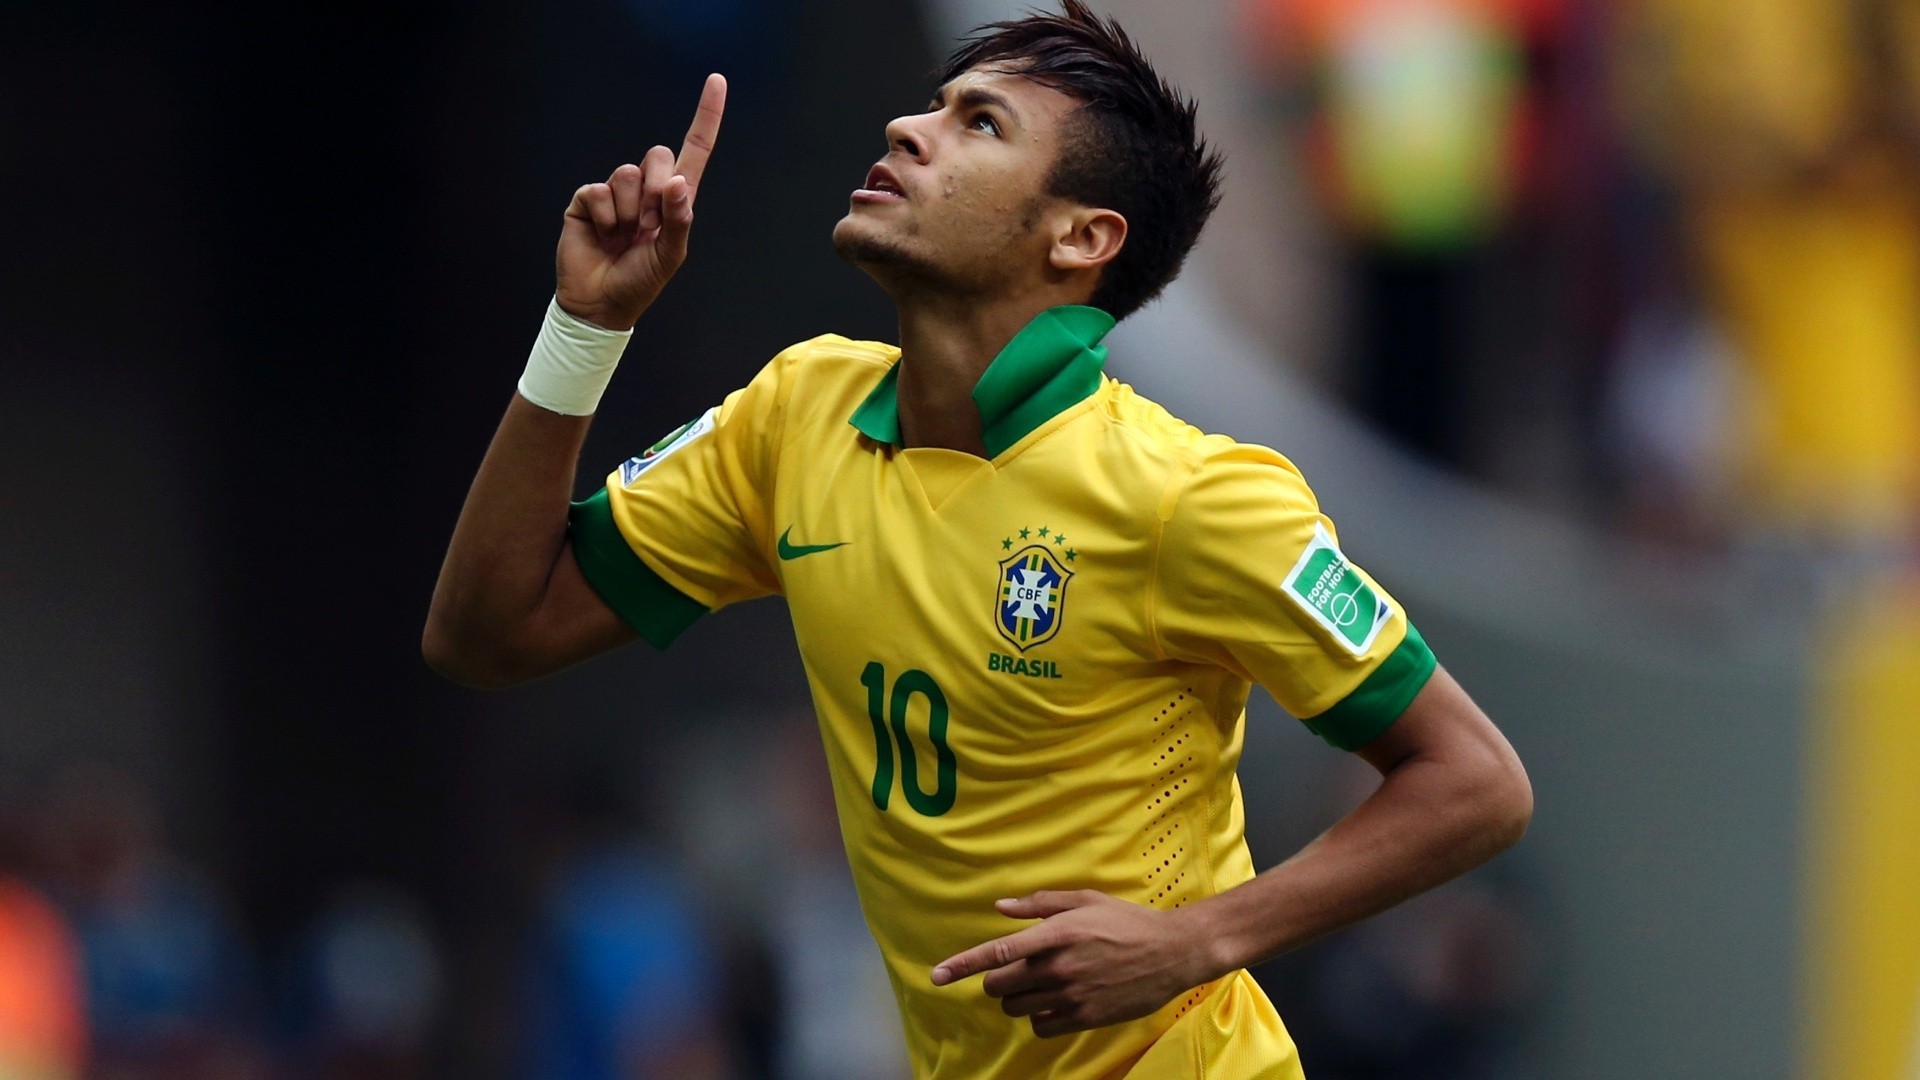 1920x1080 Brazil v Germany: five things to look out for in the World Cup semi-